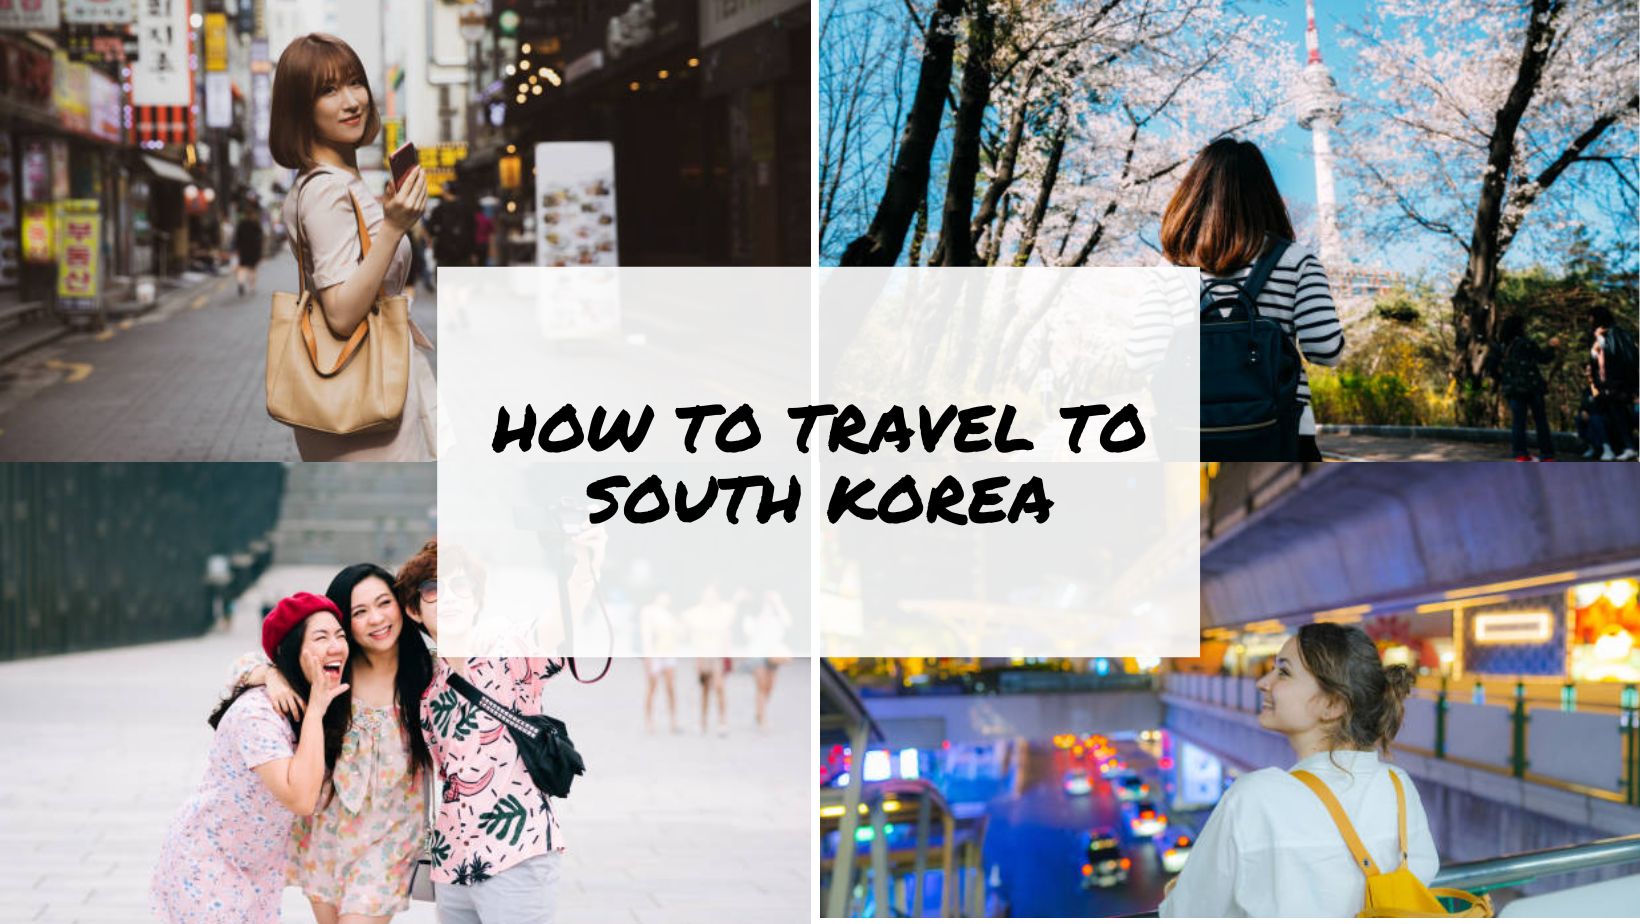 HOW TO TRAVEL TO SOUTH KOREA EVERYTHING YOU NEED TO KNOW